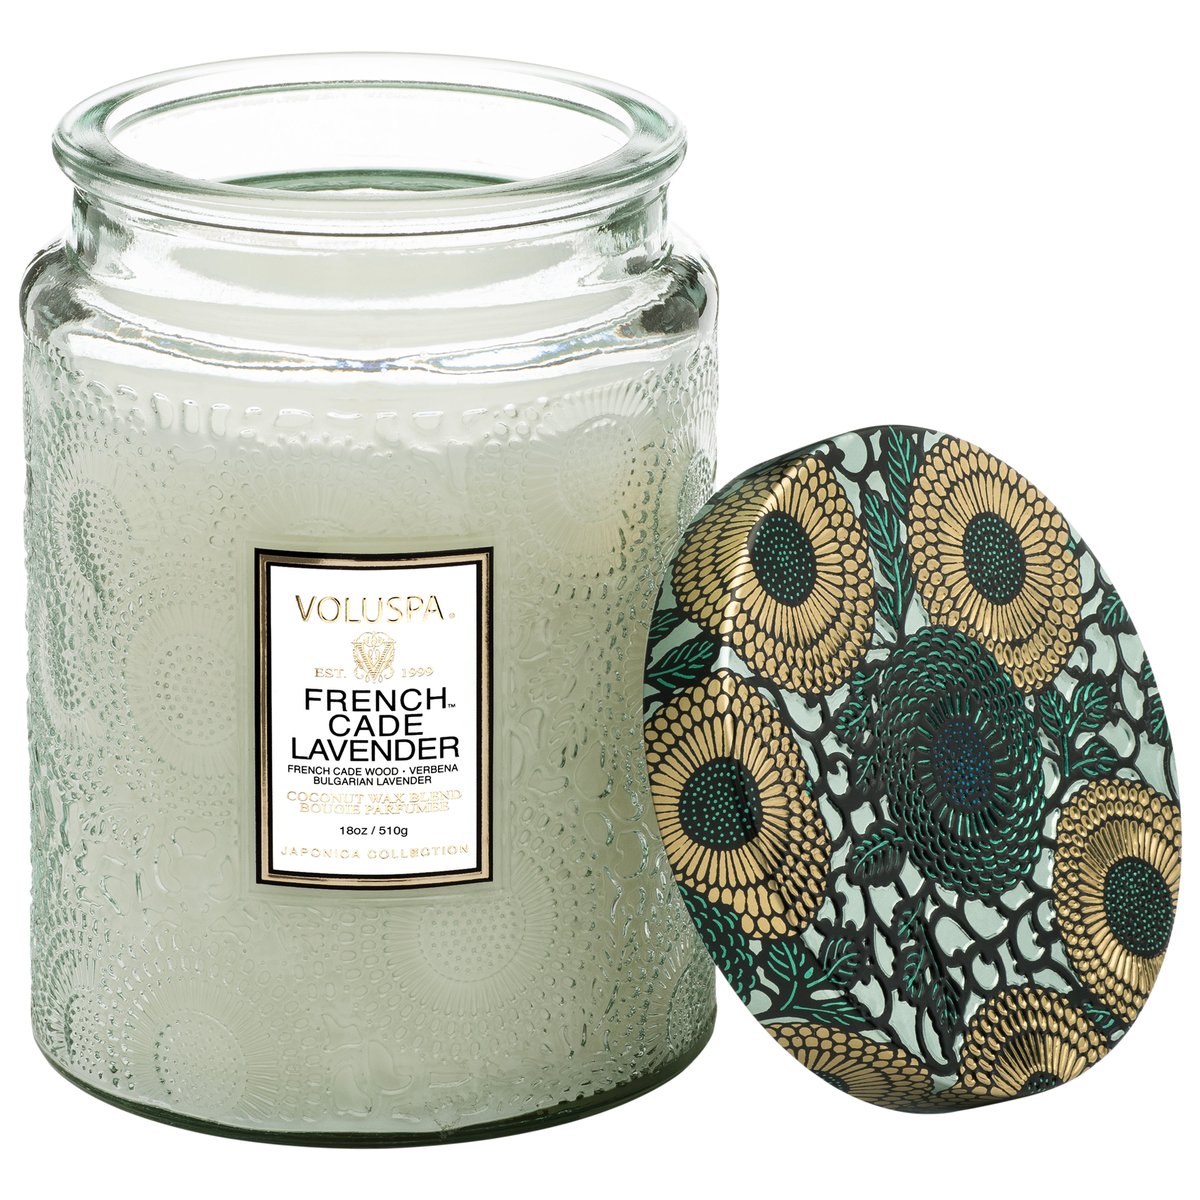 French Cade Lavender large jar candle